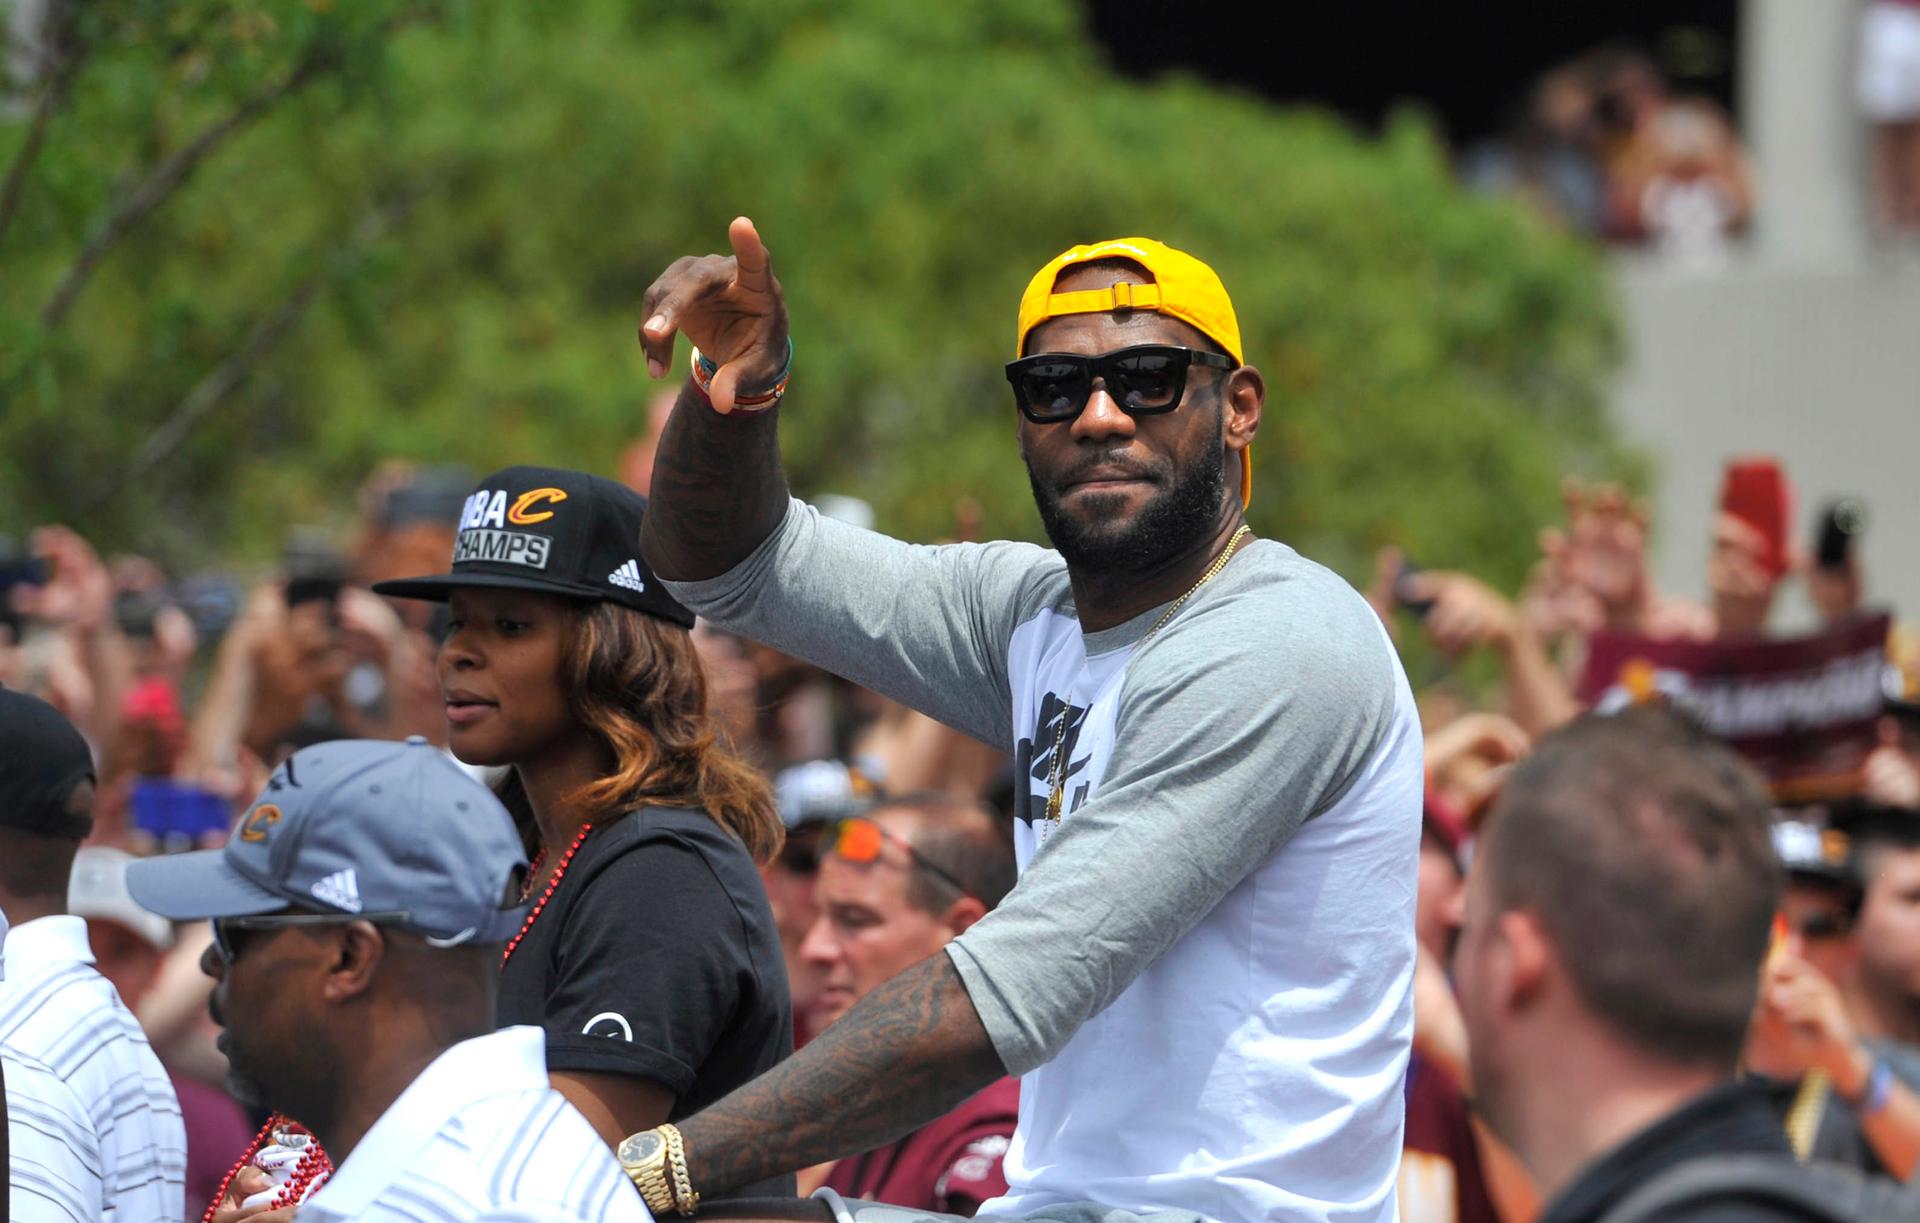 Cleveland Cavaliers forward LeBron James celebrates during the NBA championship parade in downtown Cleveland.